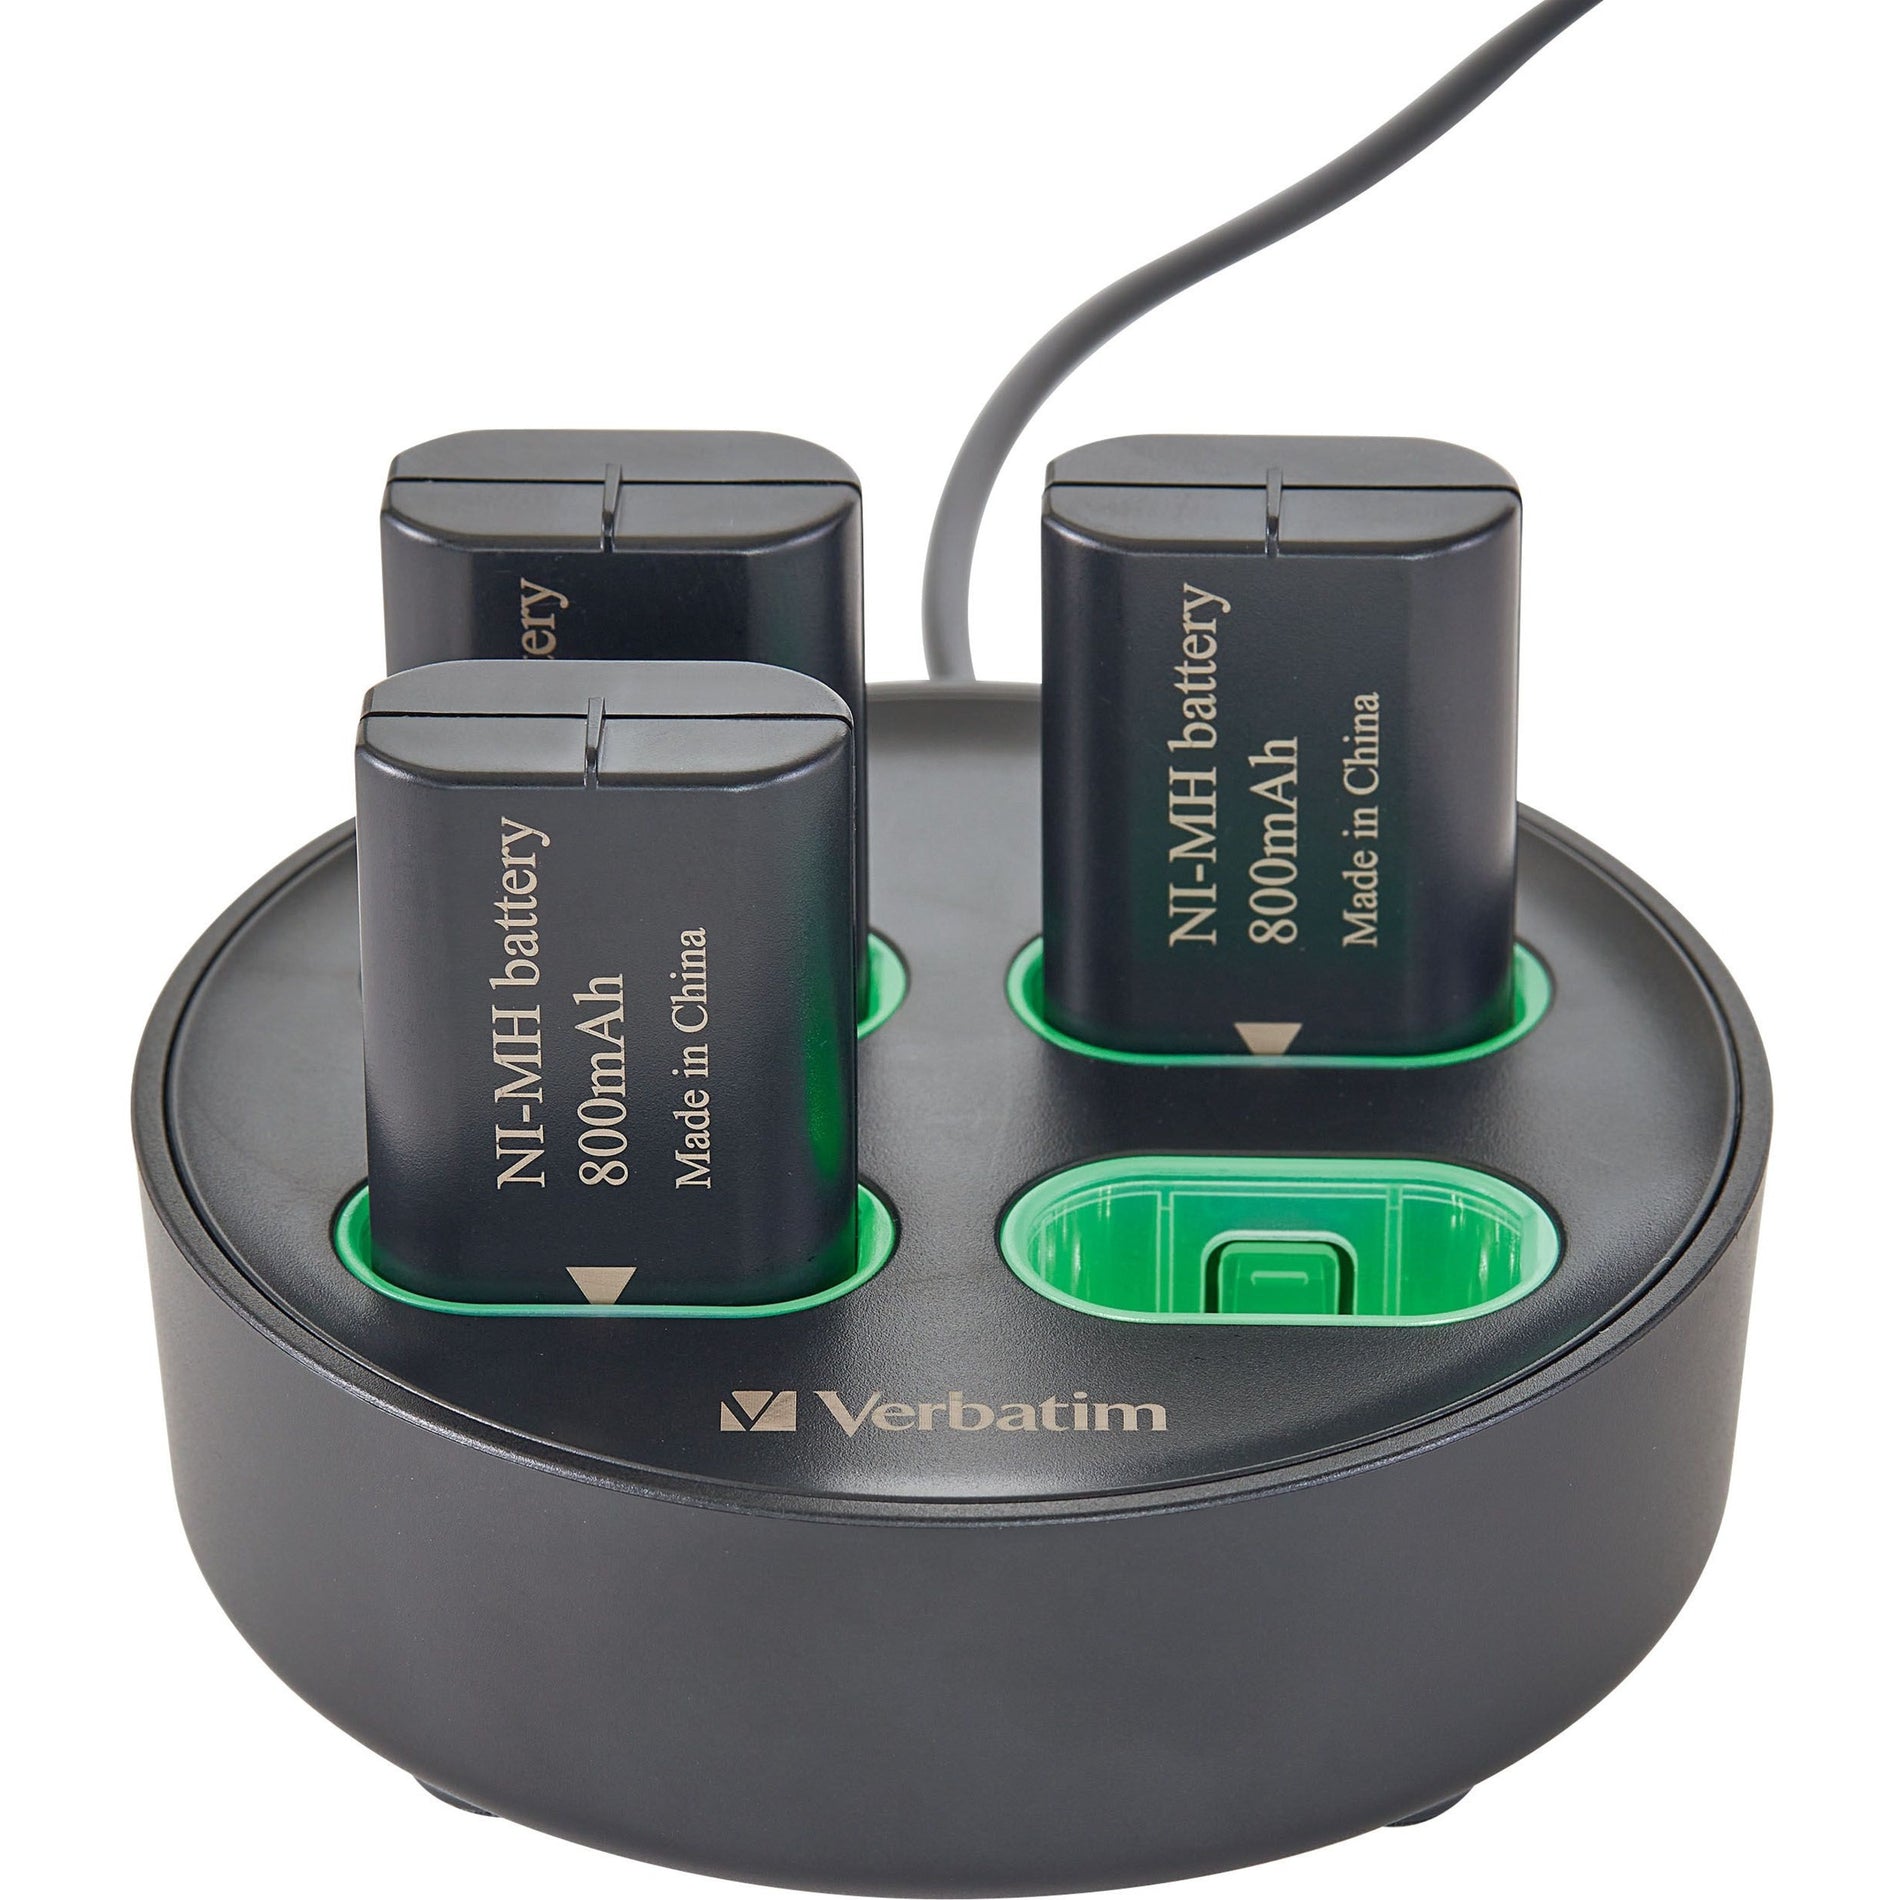 Verbatim 70729 Charging Stand for Xbox Controller Rechargeable Battery Packs, Compact and Portable Charging Station Stand